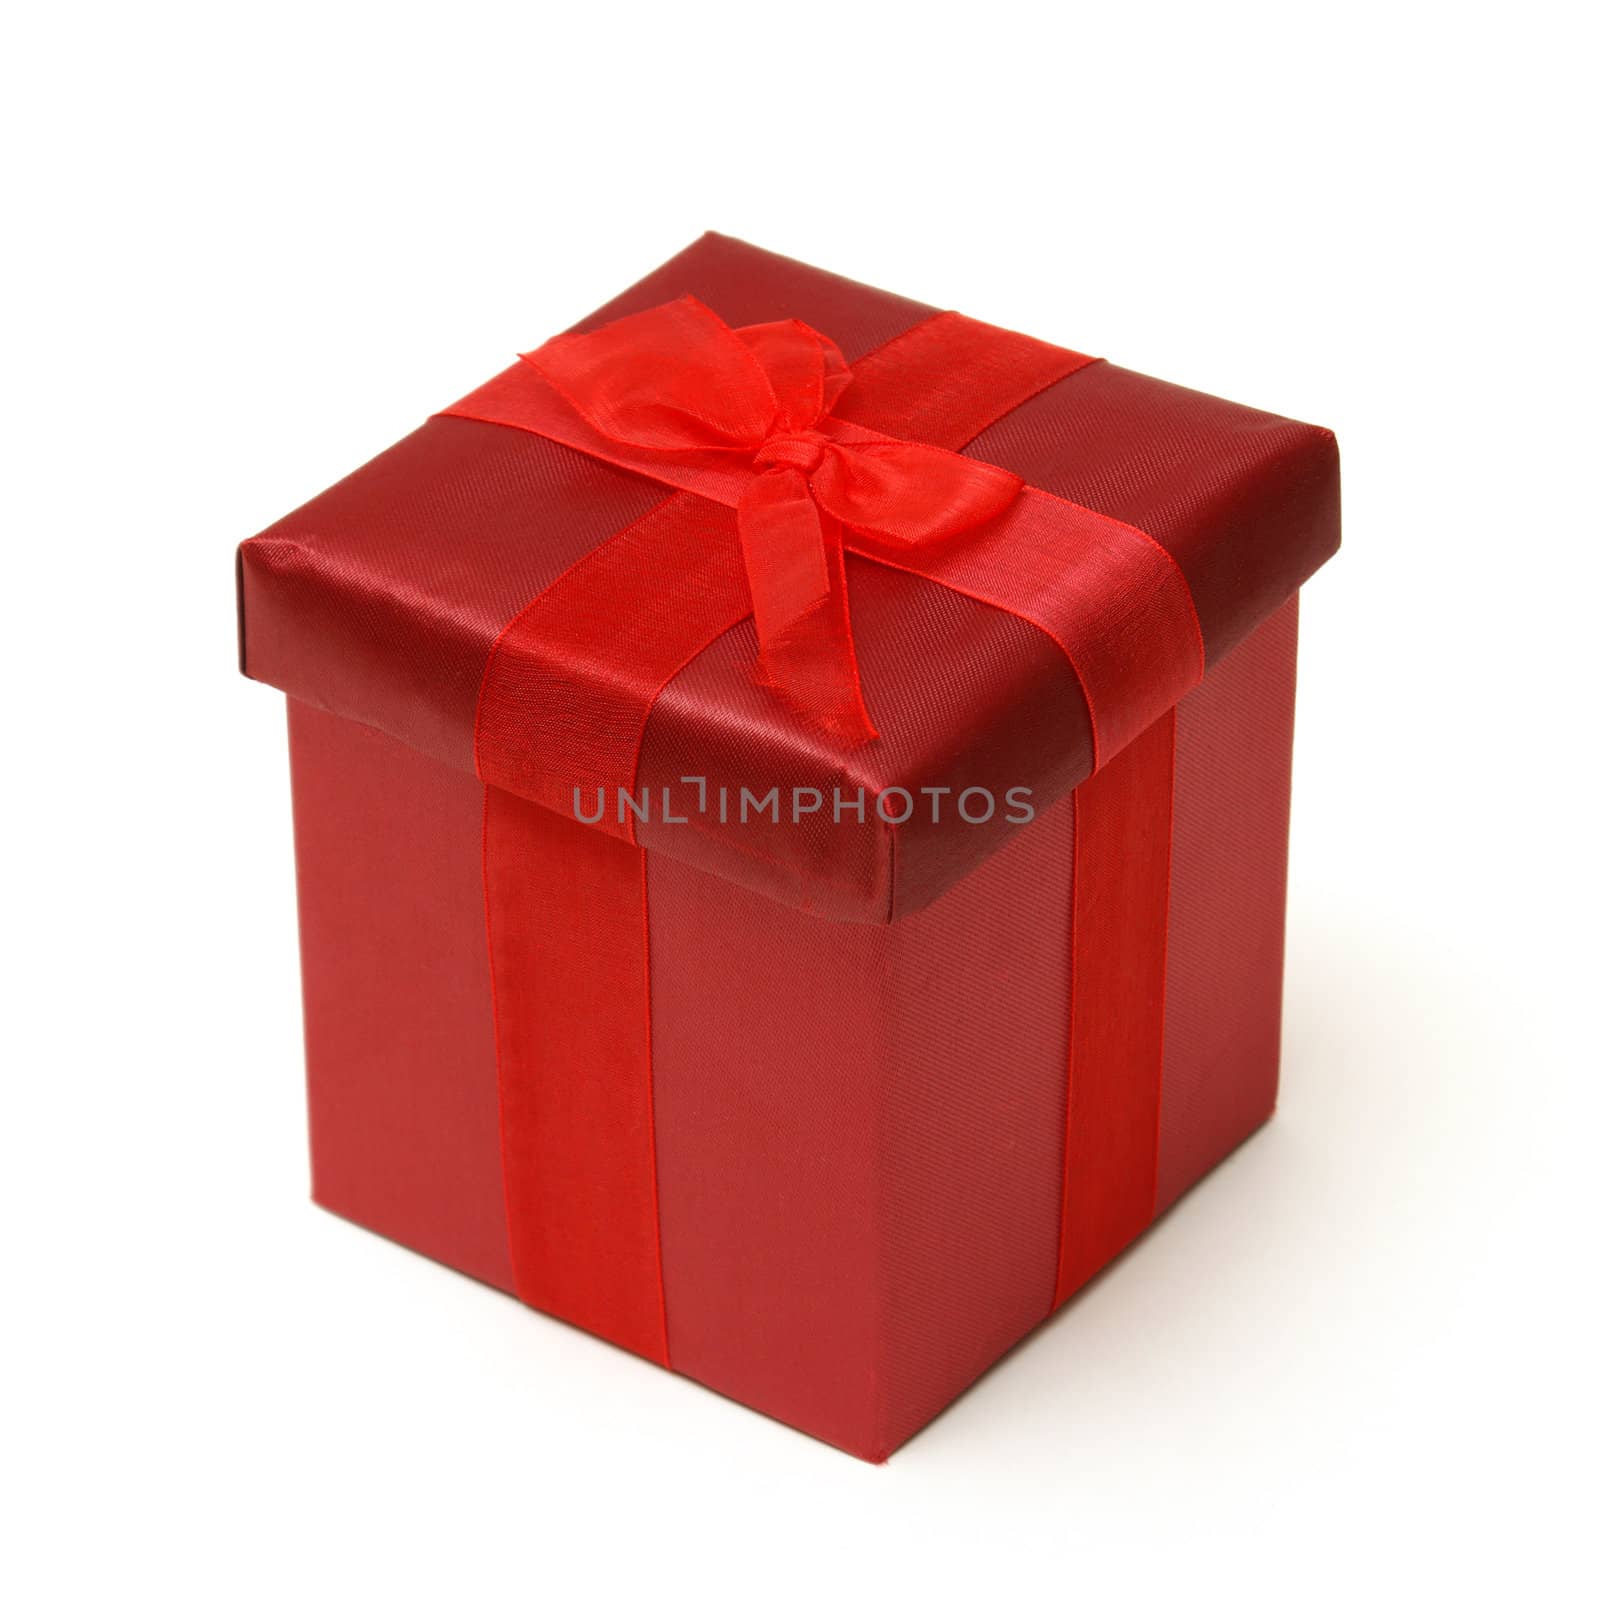 An isolated shot of a red gift box for that special occasion.